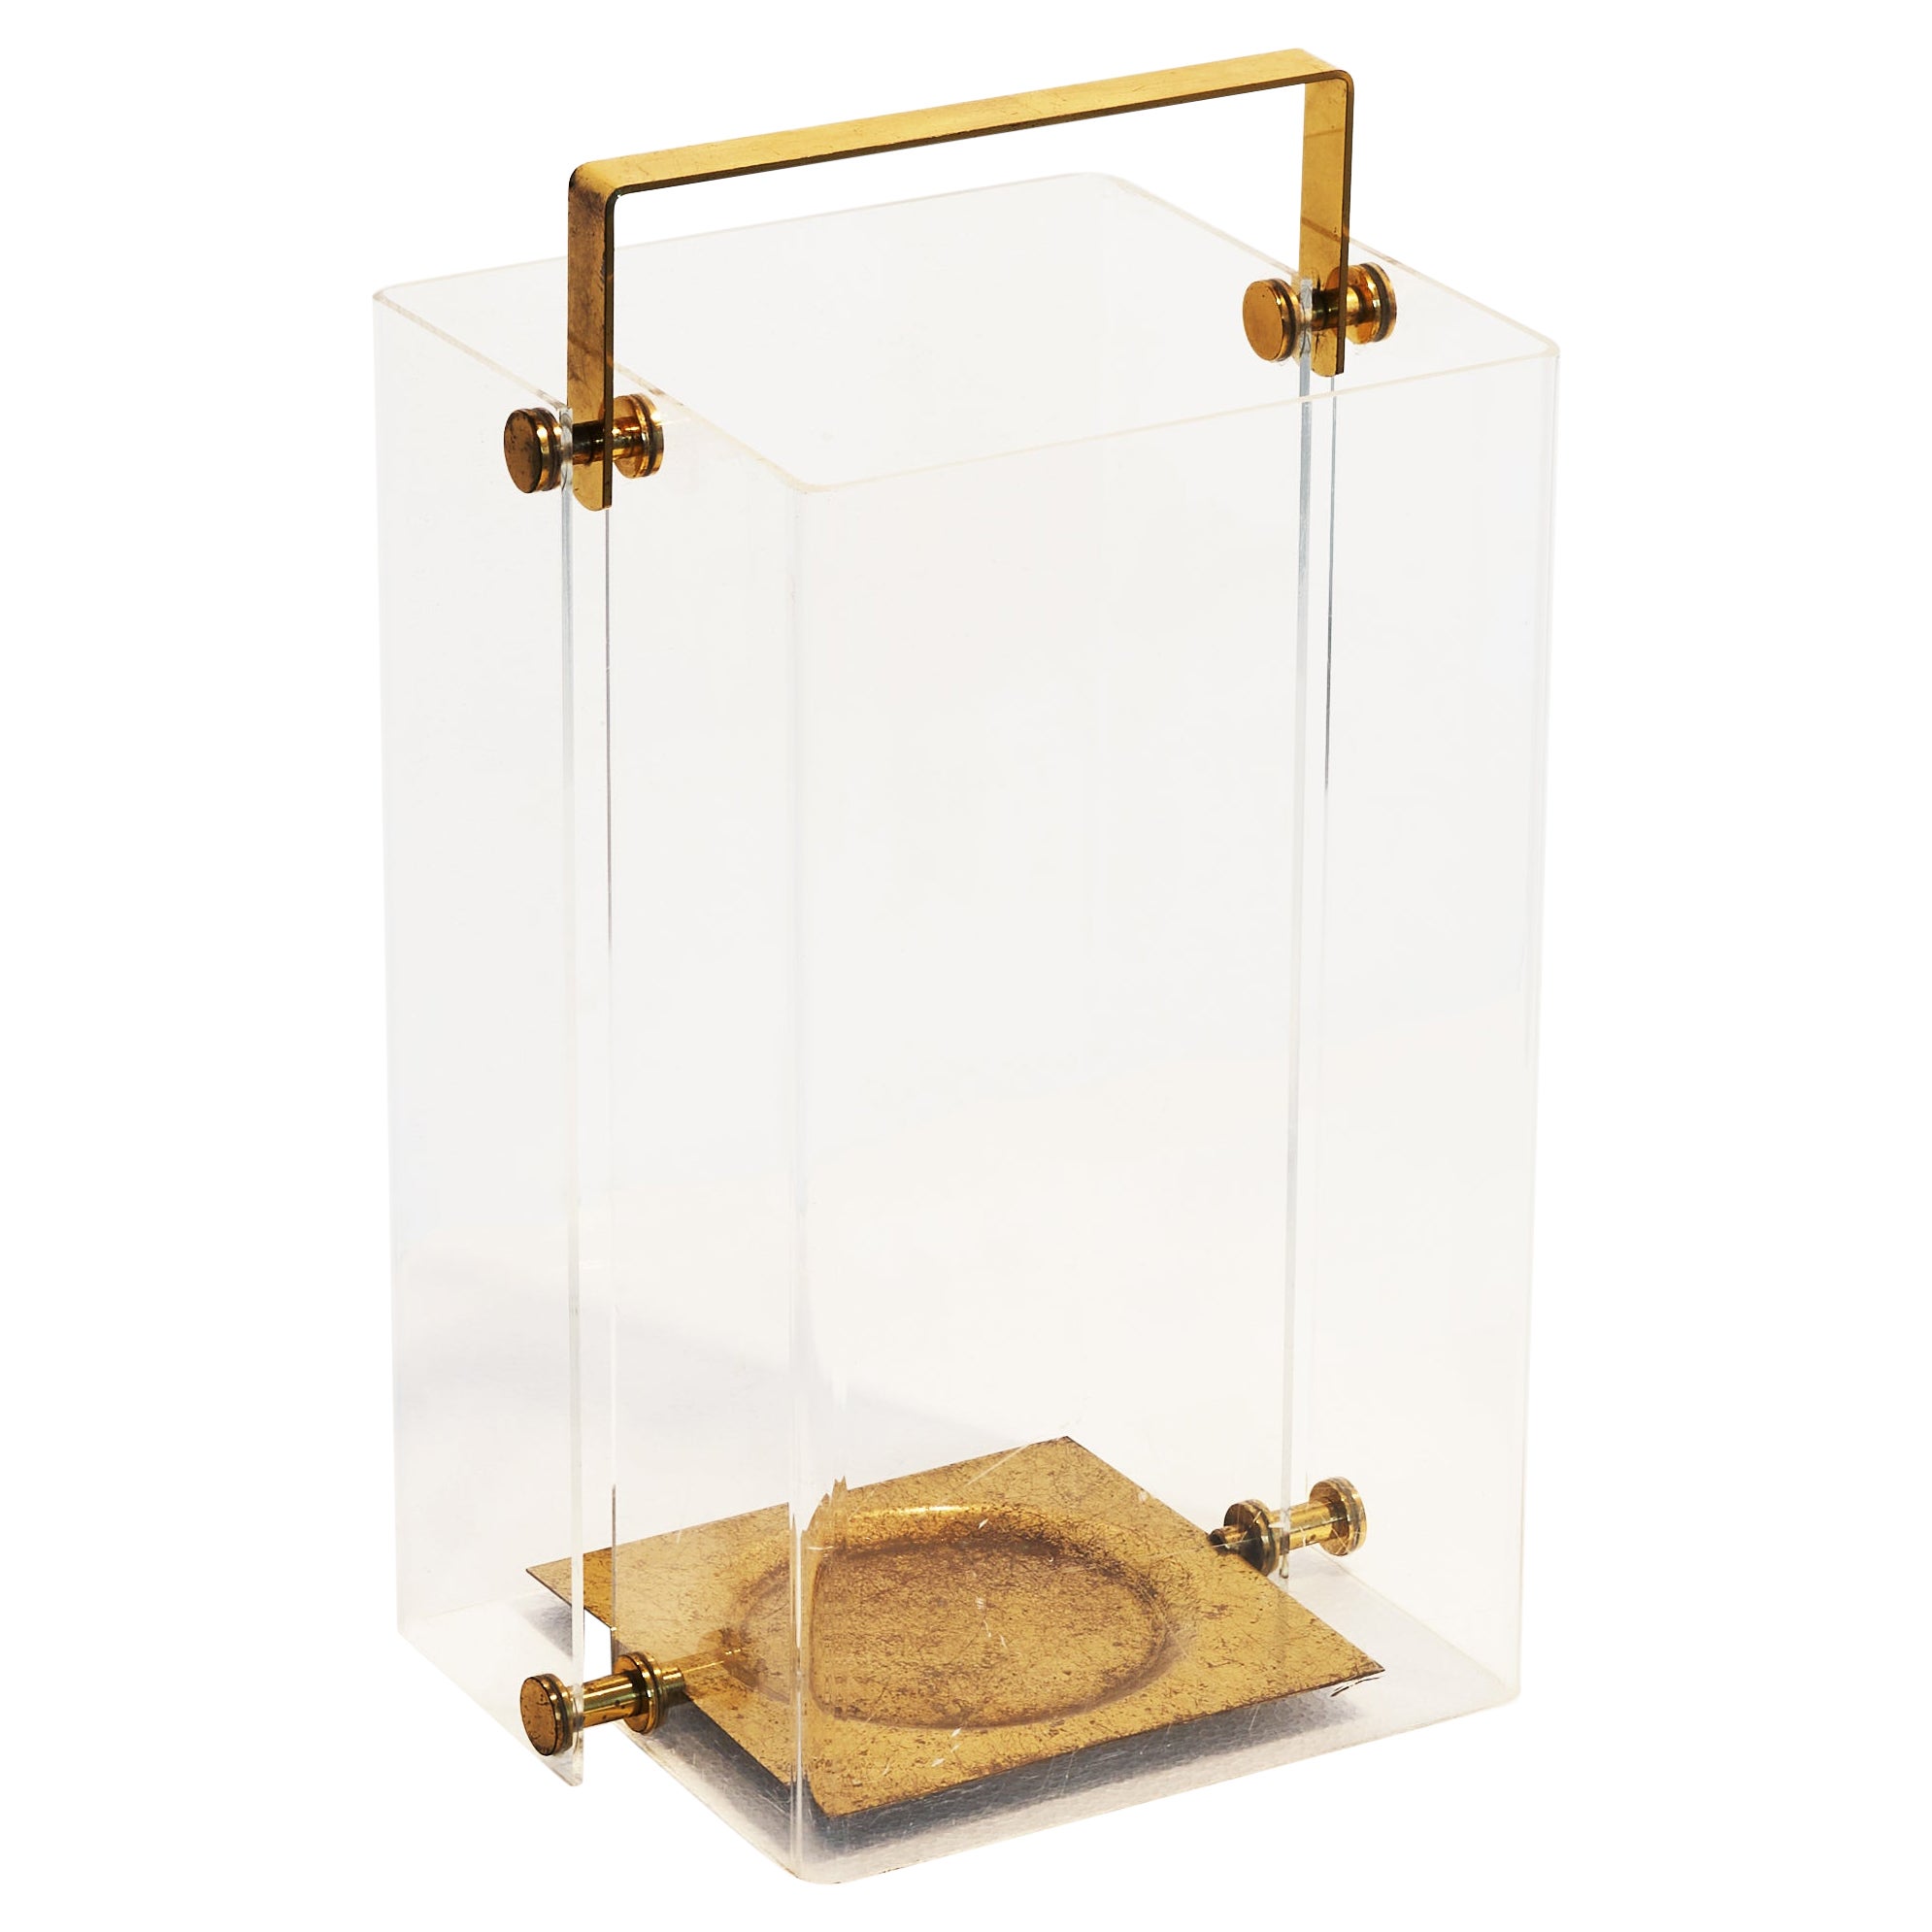 David Lange Umbrella Stand in Acrylic Glass and Patinated Brass